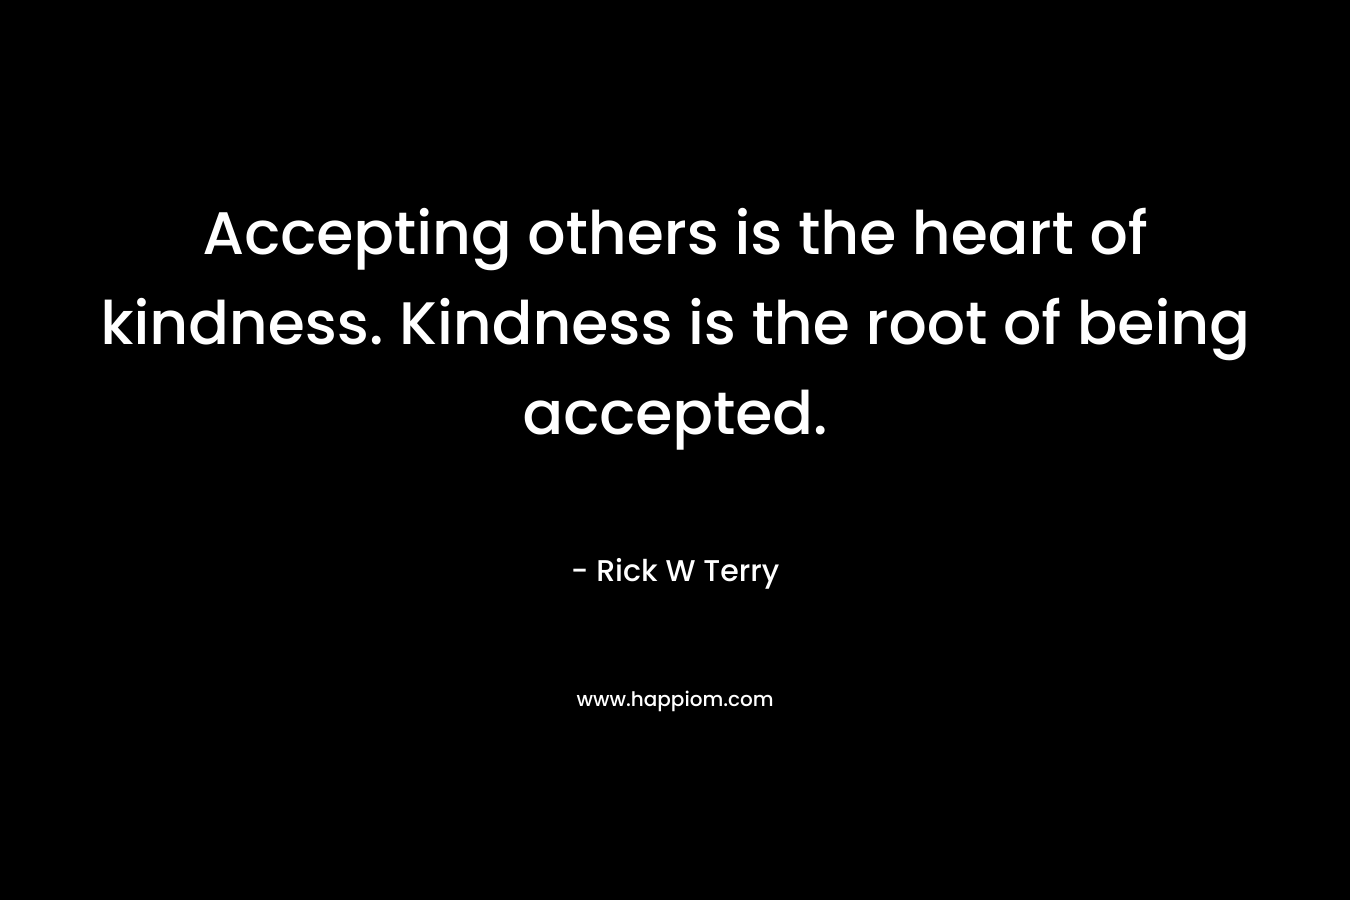 Accepting others is the heart of kindness. Kindness is the root of being accepted.